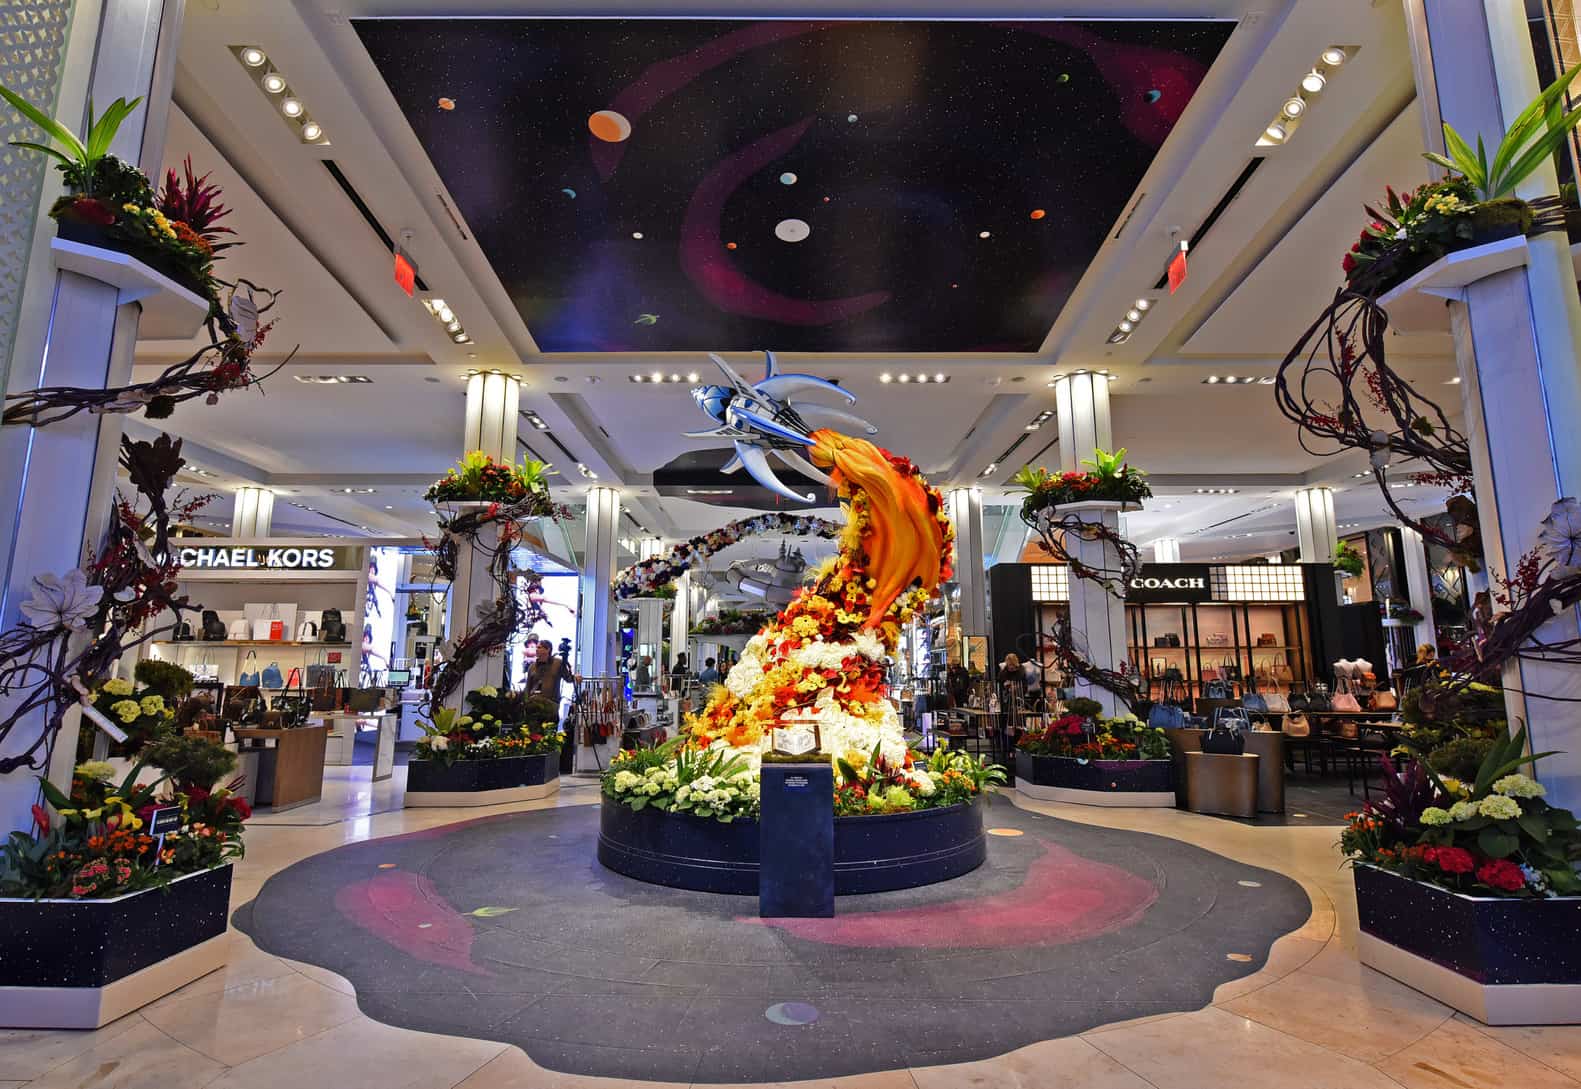 Macy's 2019 Flower Show Opens March 24 in Herald Square